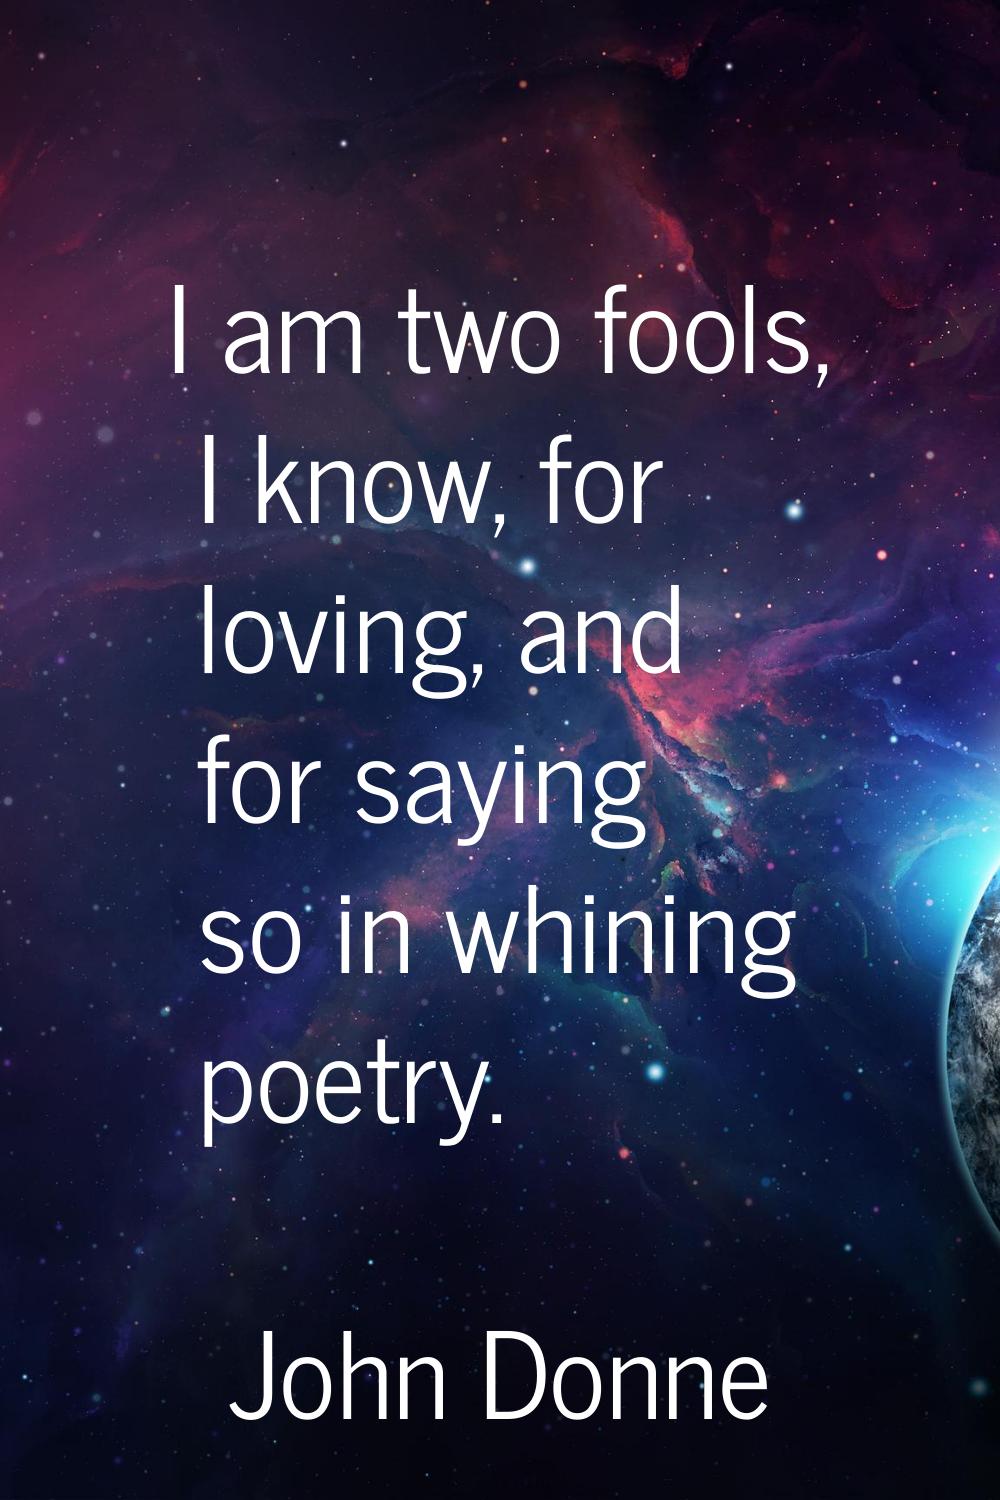 I am two fools, I know, for loving, and for saying so in whining poetry.